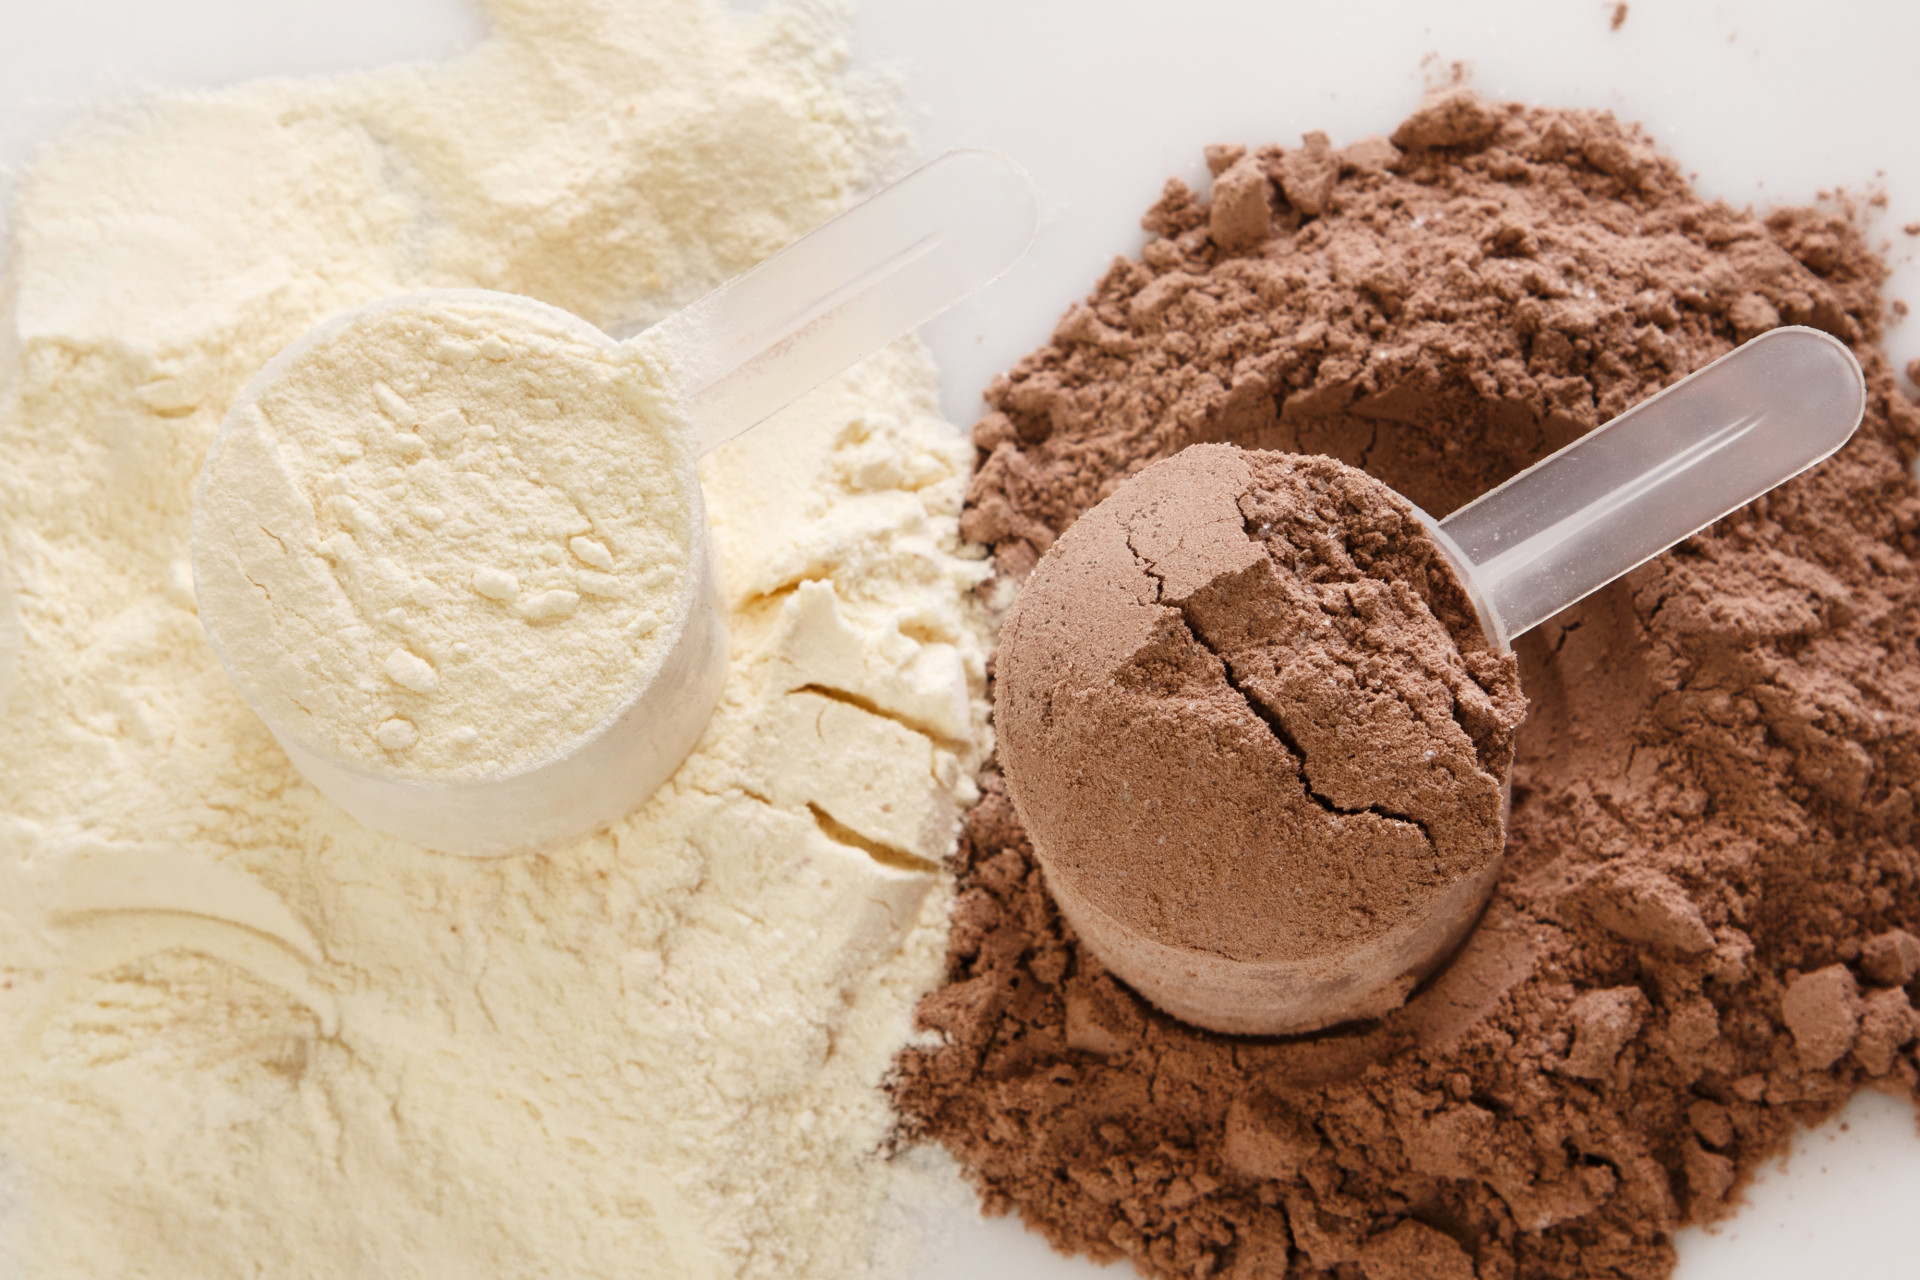 Many protein powders come packed with vitamins and minerals, and keep you full for longer. Bring a scoop in a bottle, and just add the liquid after the security check or in-flight.<p>You may also like:<a href="https://www.starsinsider.com/n/501666?utm_source=msn.com&utm_medium=display&utm_campaign=referral_description&utm_content=356024v3en-us"> What would happen to Earth if humans went extinct?</a></p>